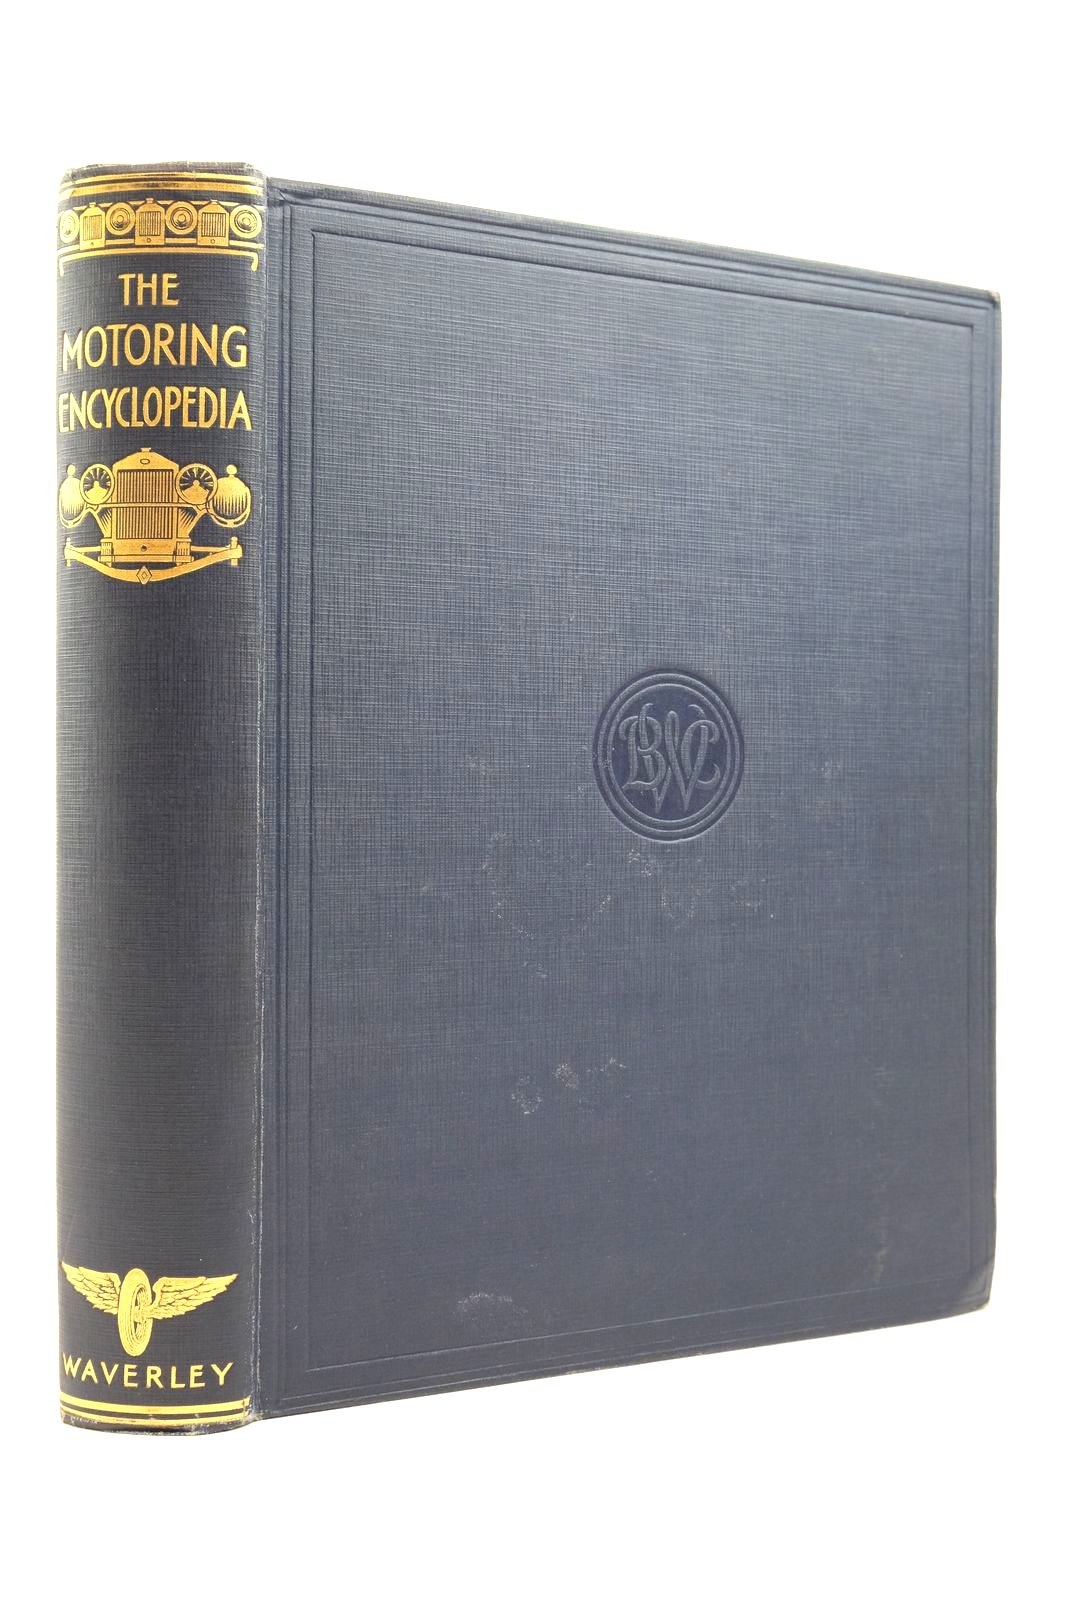 Photo of THE MOTORING ENCYCLOPEDIA & TOURING GAZETTEER OF THE BRITISH ISLES written by Stubbs, S.G. Blaxland
Manton, Greville G.O.
Stewart, Oliver
Geddes, Donald published by The Waverley Book Company Ltd. (STOCK CODE: 2139061)  for sale by Stella & Rose's Books